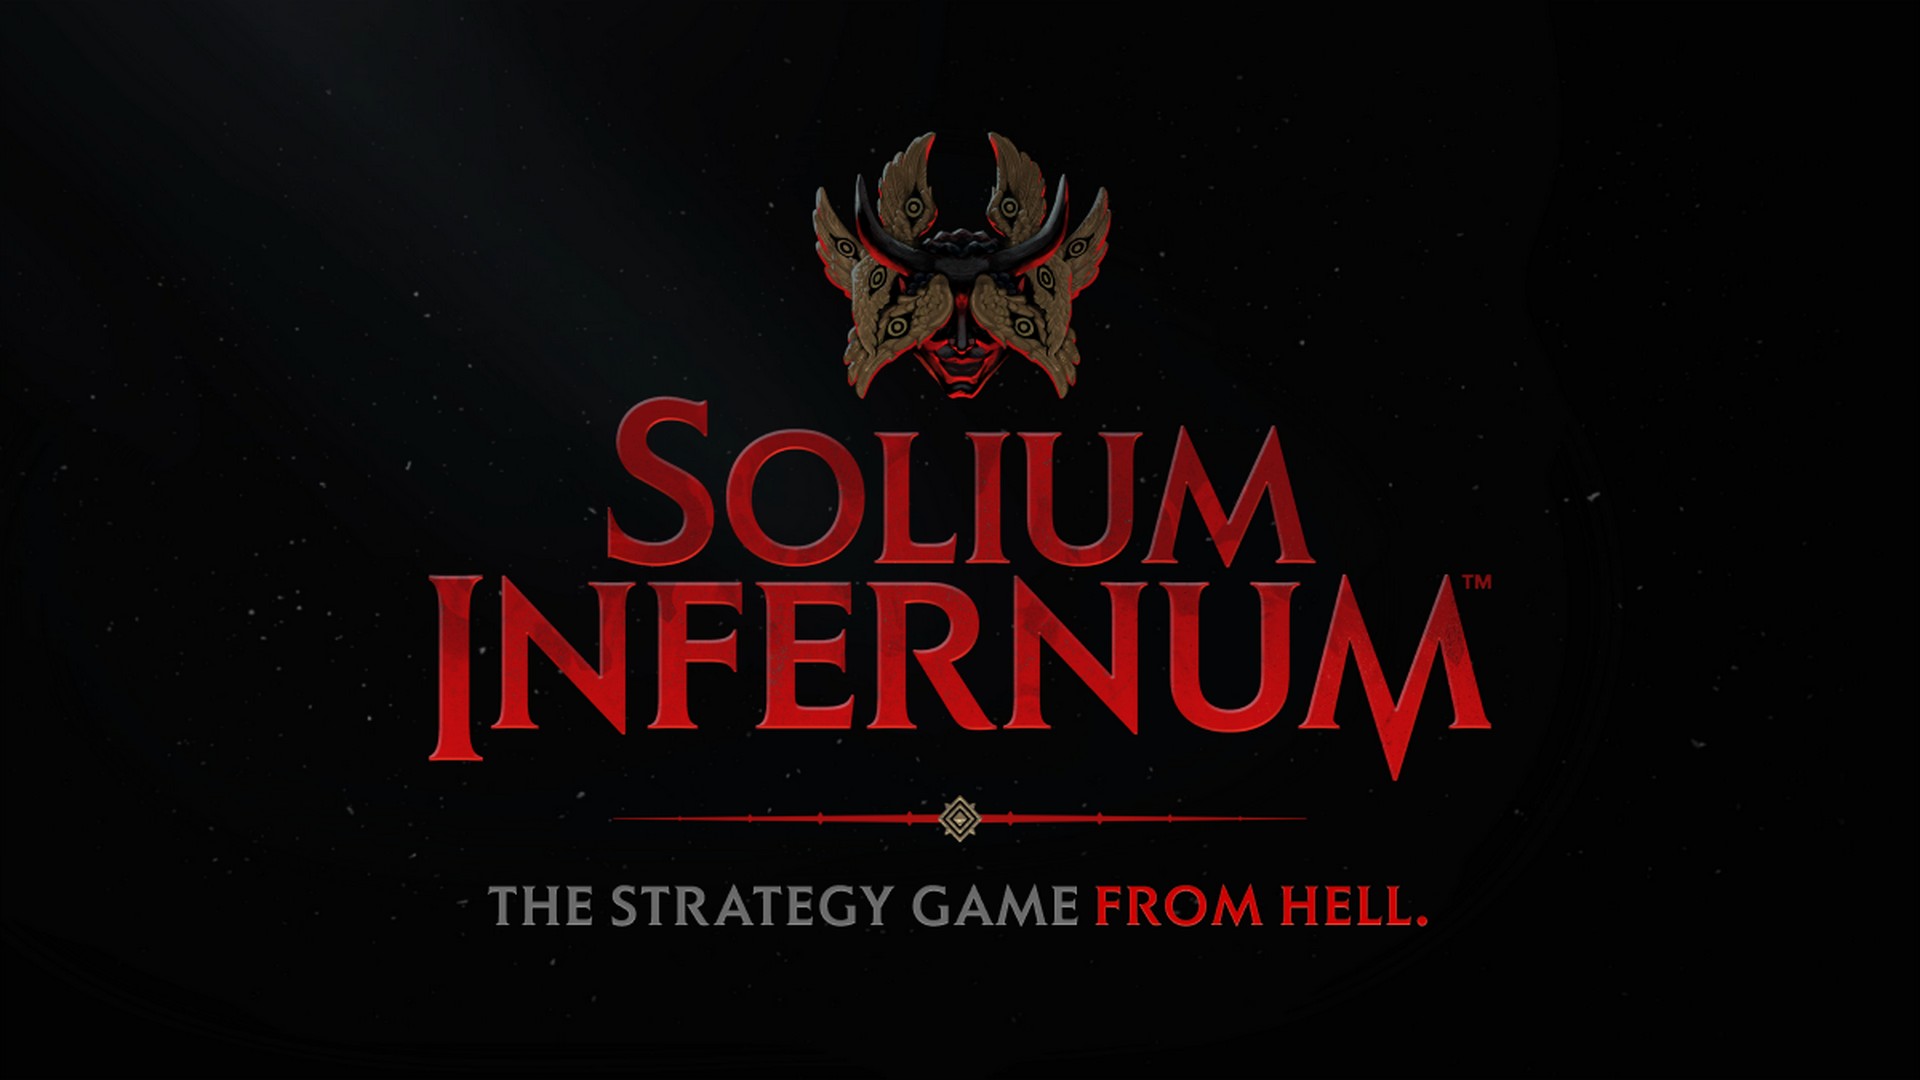 Solium Infernum Releases On February 14 – New Infernal Strategy Trailer Launched